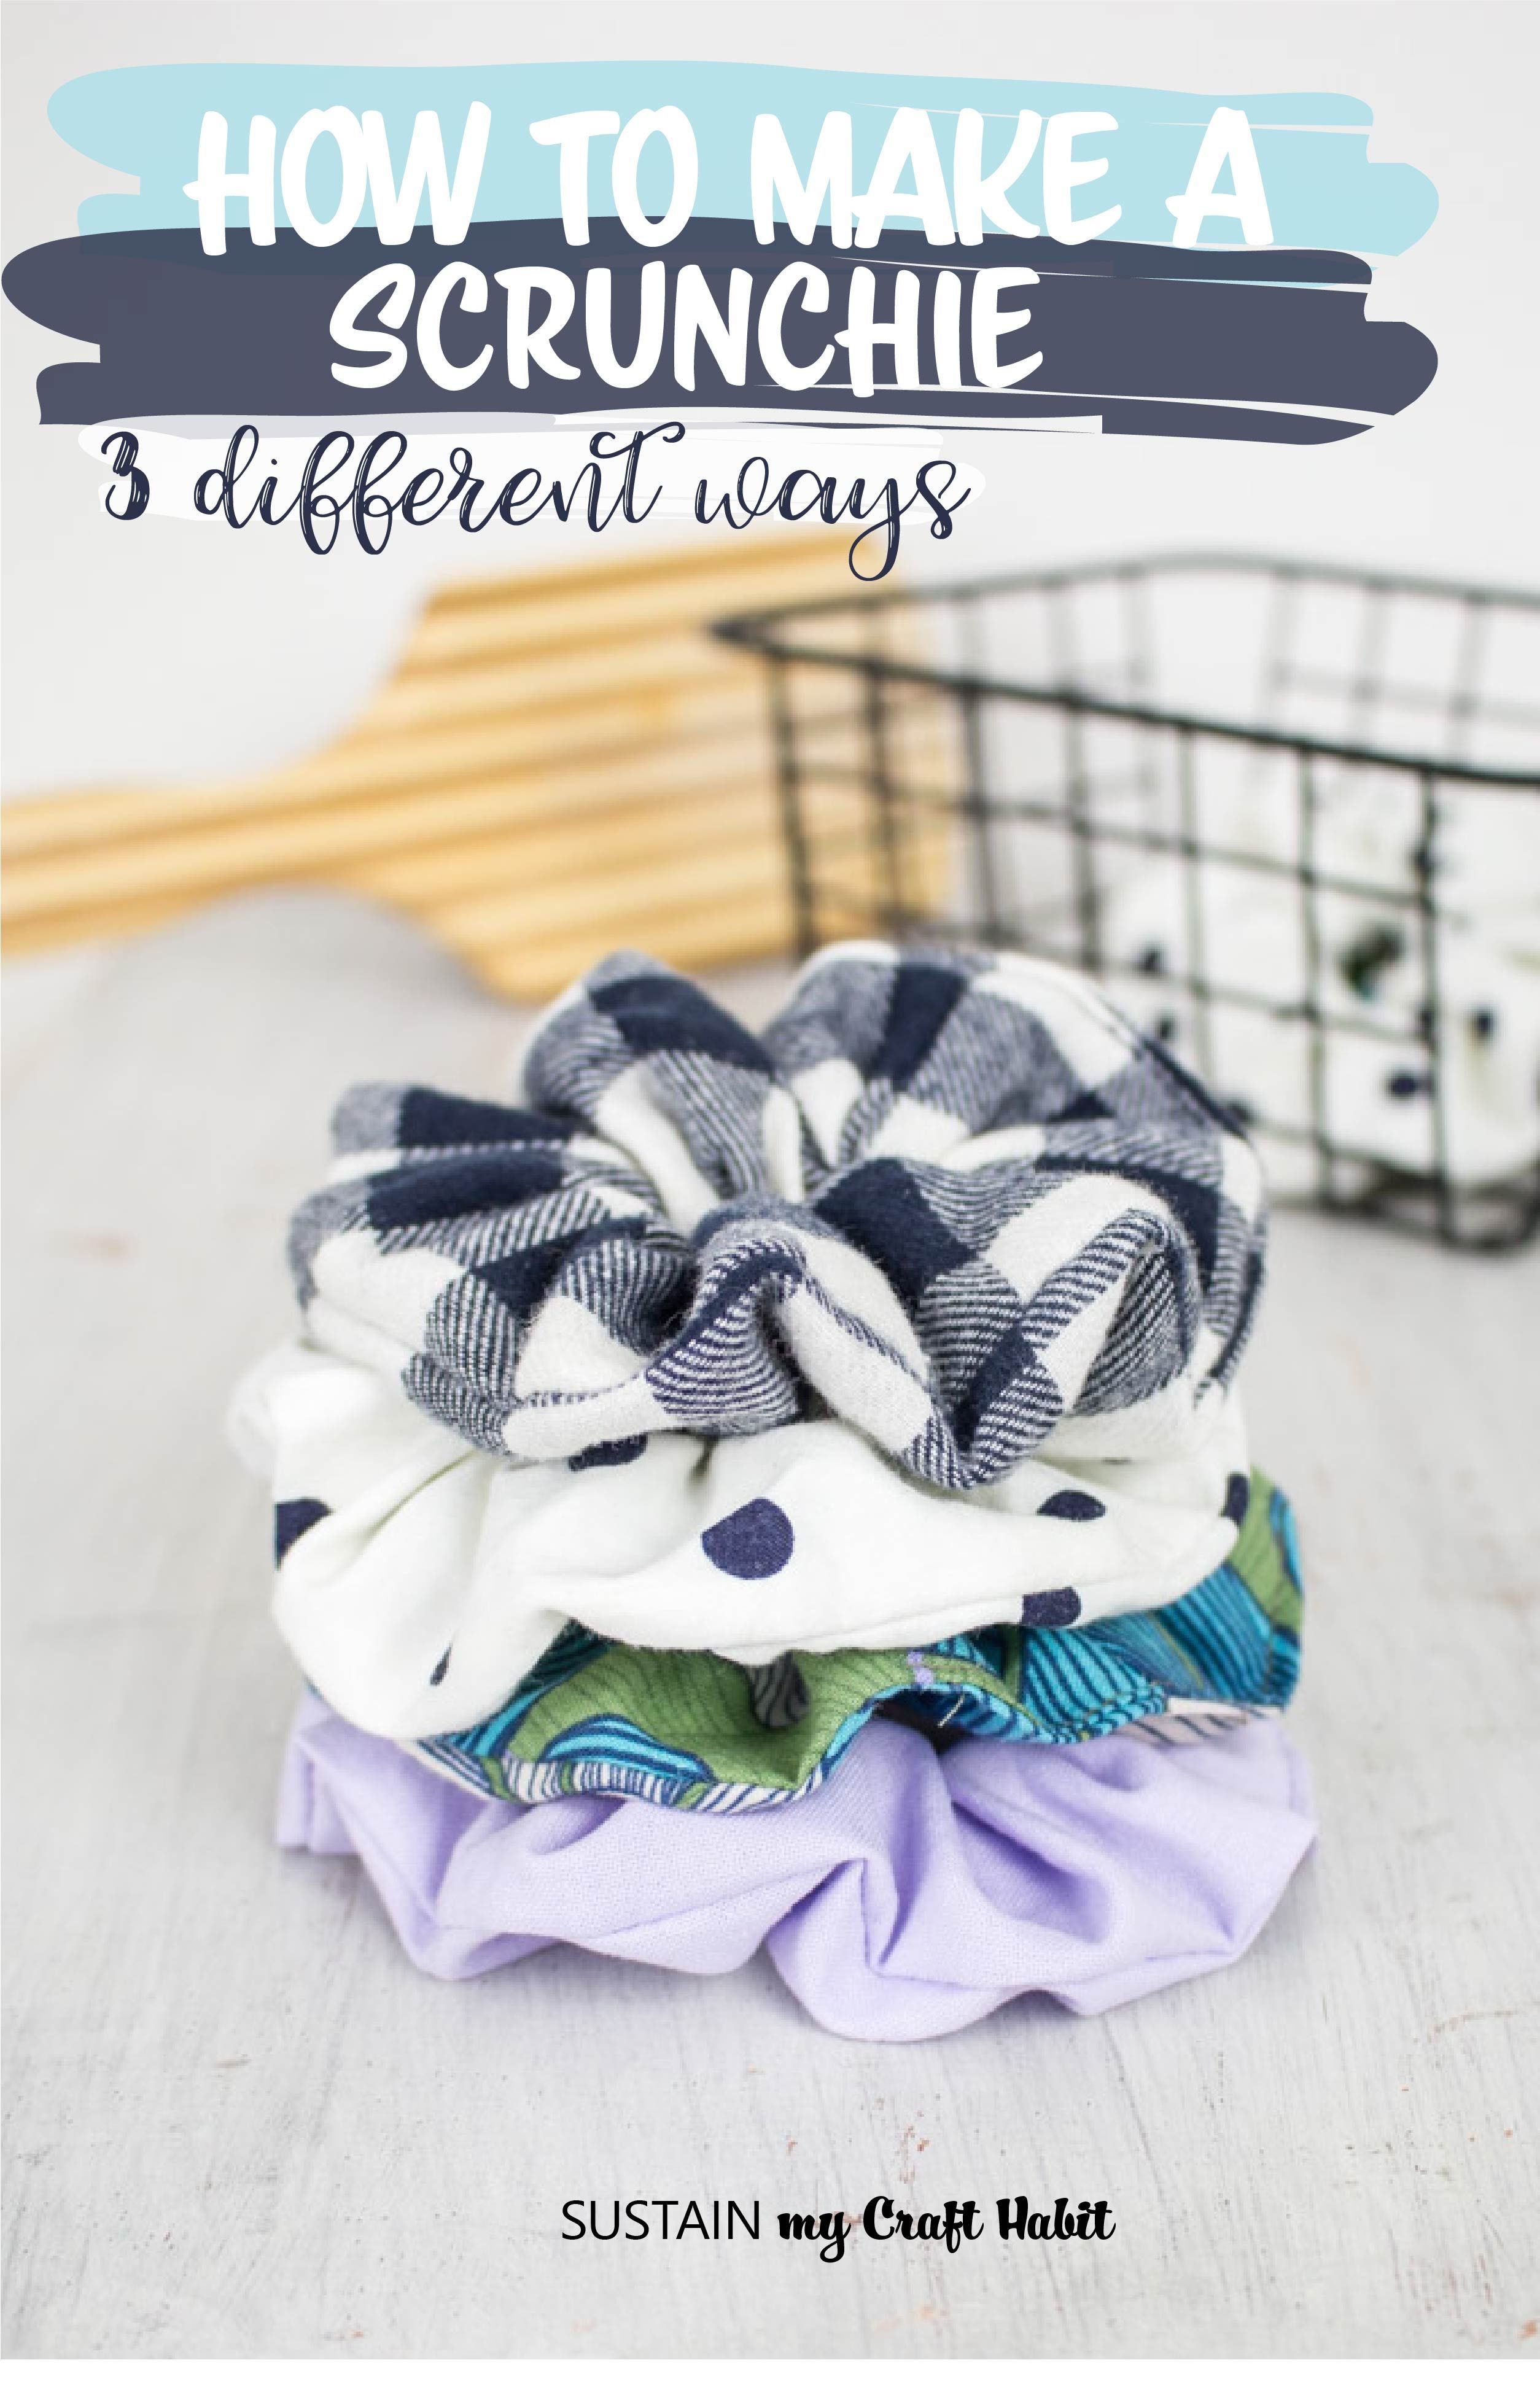 How to Make a Scrunchie 3 Different Ways - How to Make a Scrunchie 3 Different Ways -   19 fabric crafts diy no sew ideas